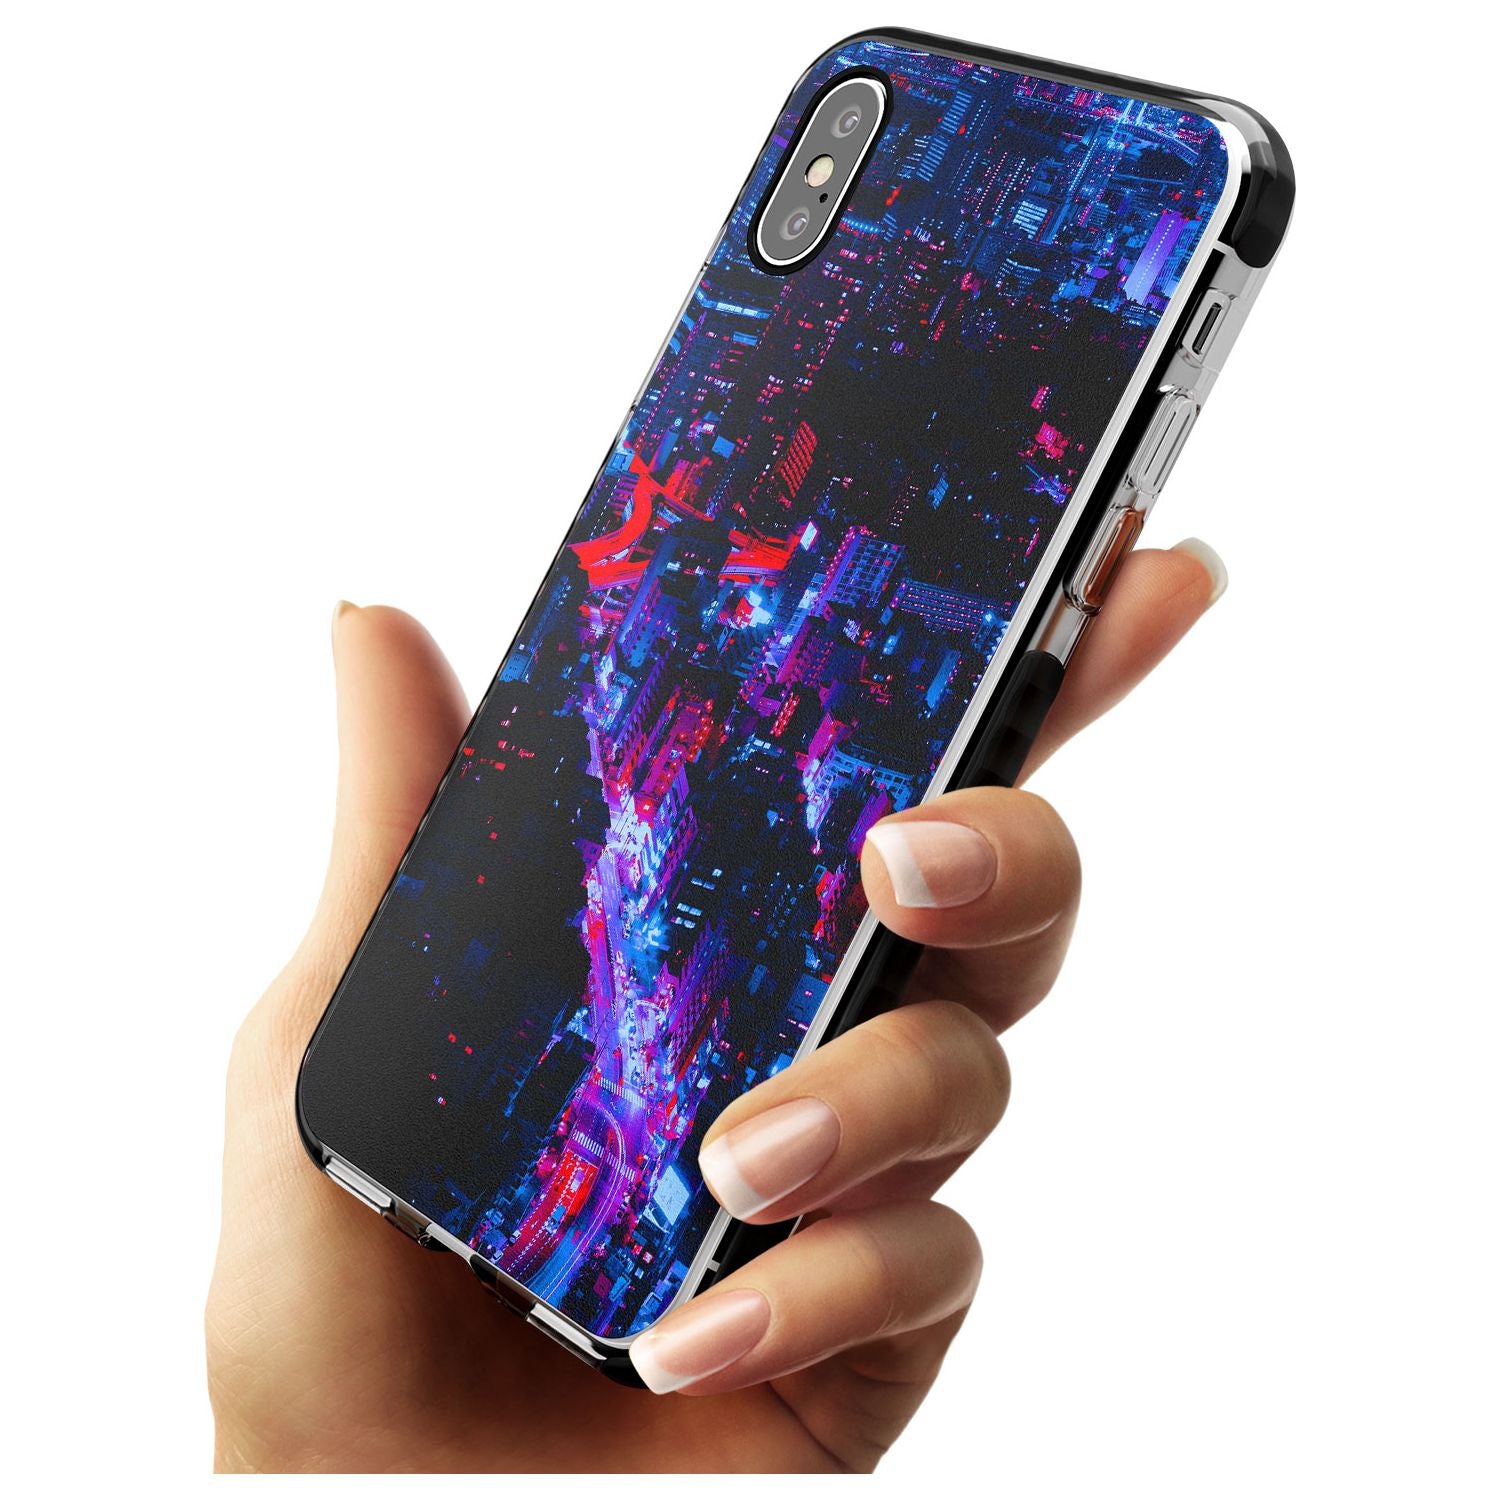 Arial City View - Neon Cities Photographs Black Impact Phone Case for iPhone X XS Max XR